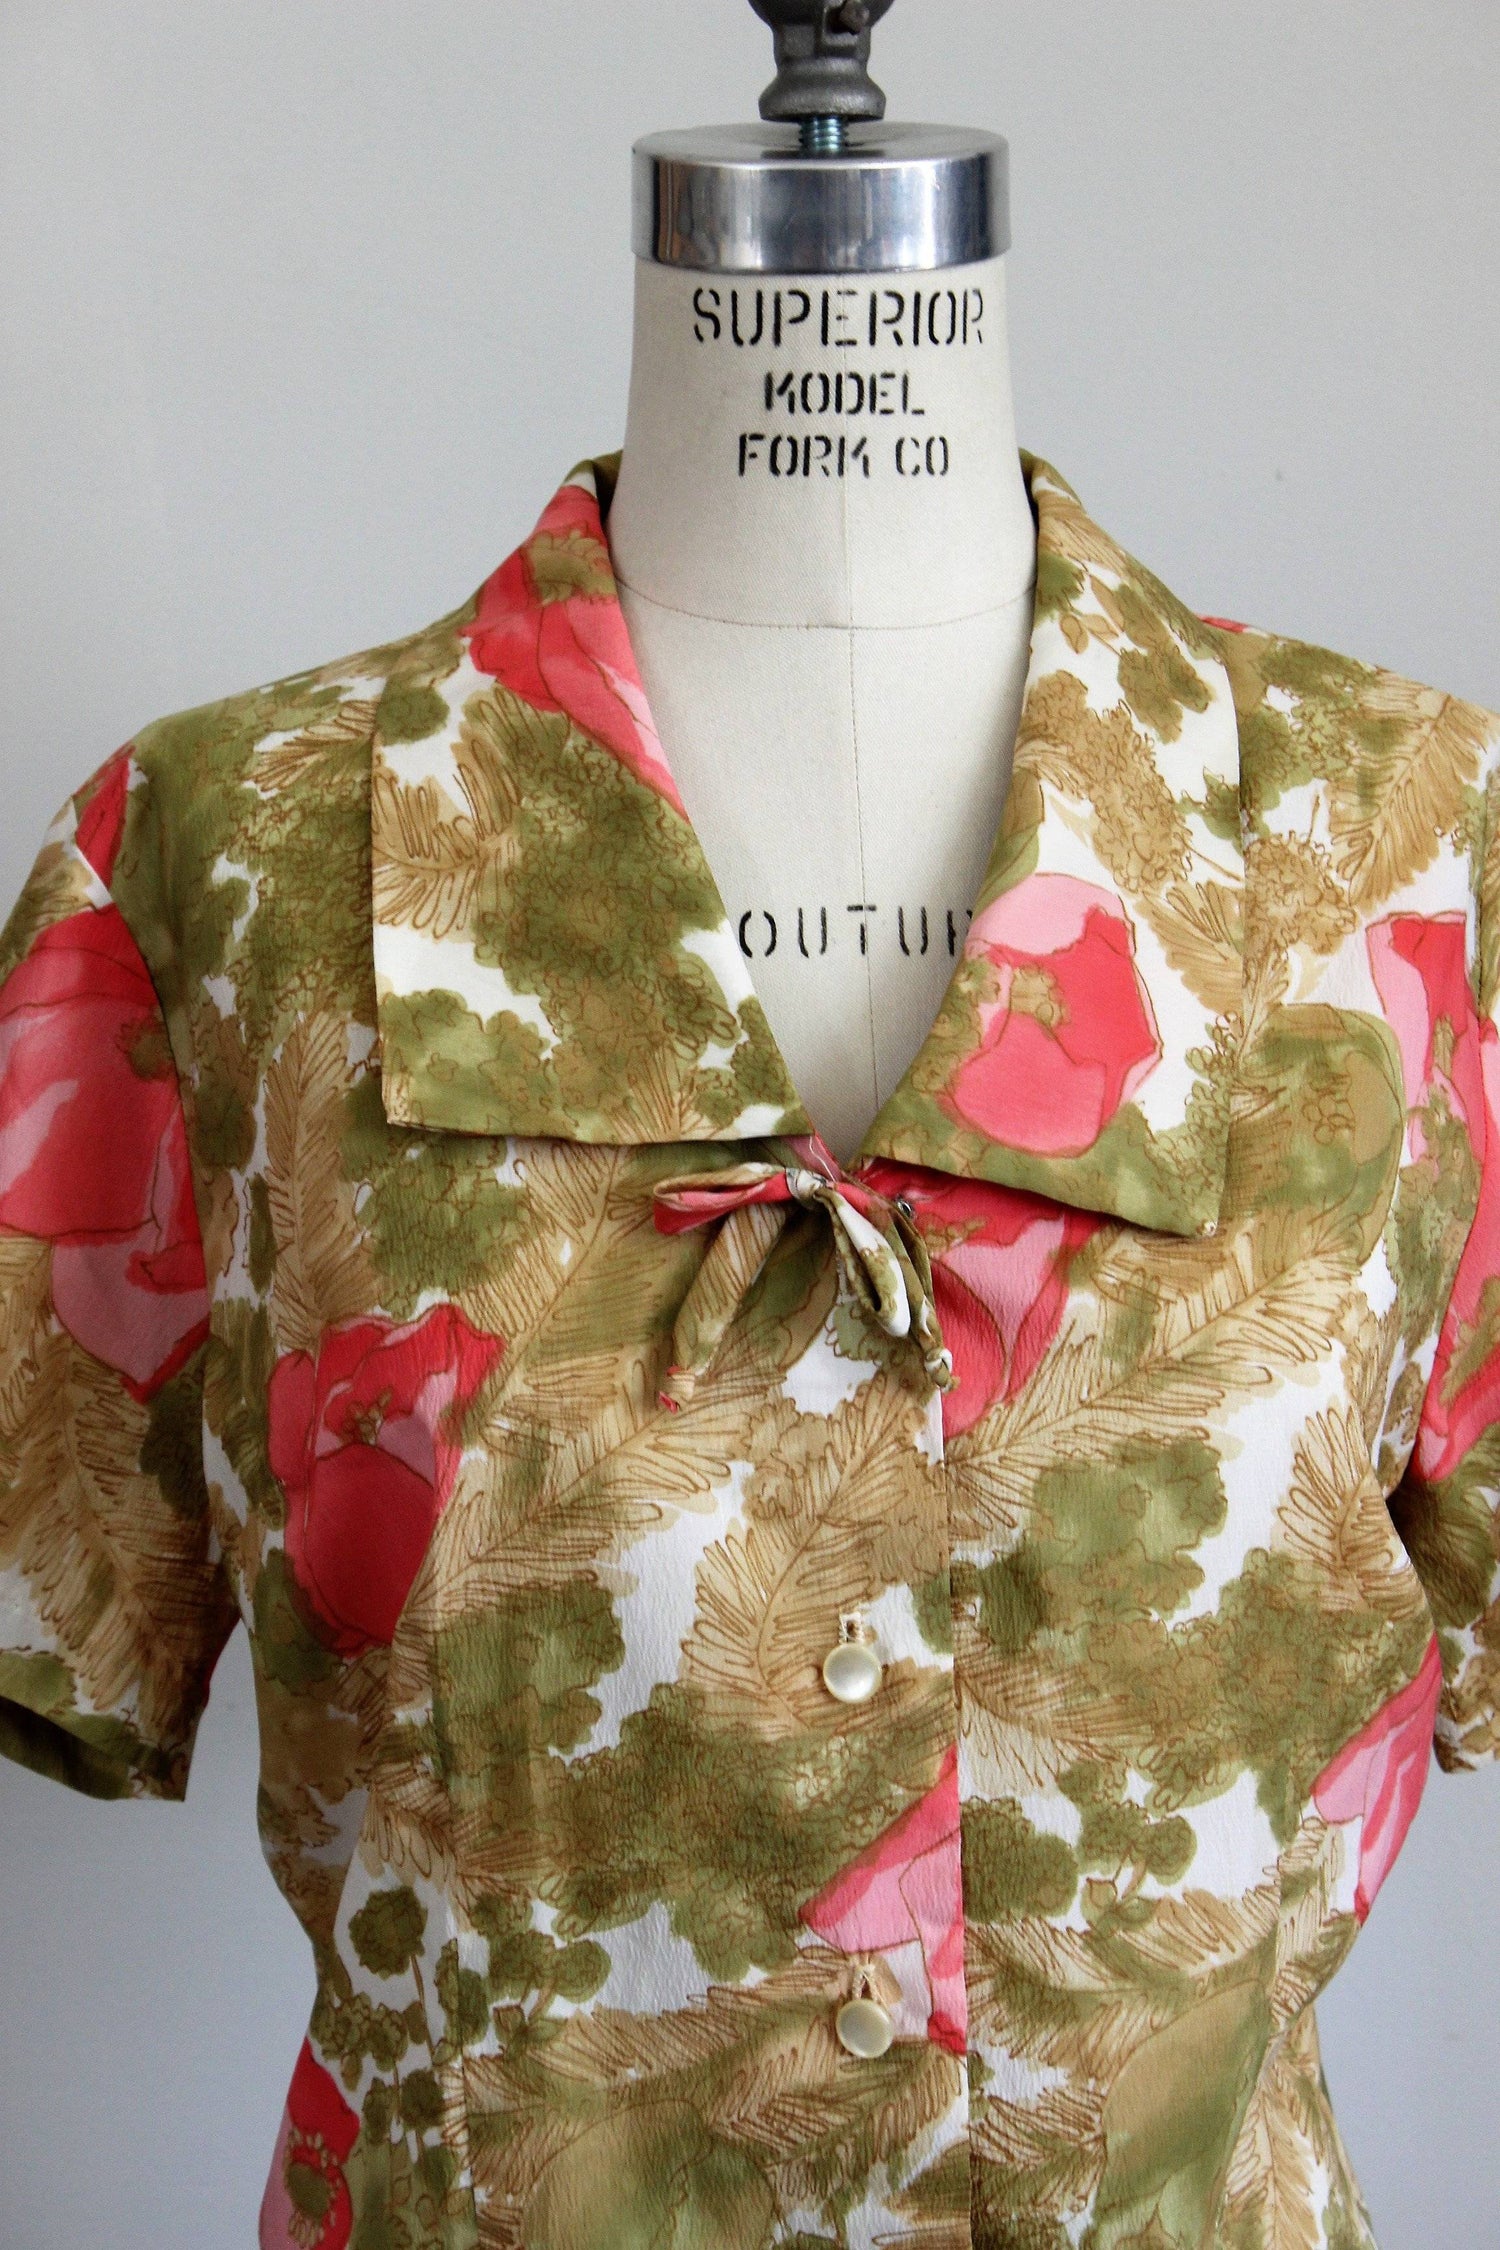 Vintage 1960s Floral Blouse by Teddi of California-Toadstool Farm Vintage-1960s Blouse,1960s Top,Cropped Top,Floral Blouse,Floral Print,Pussy Bow,Teddi of California,Vintage,Vintage Clothing,Vintage Shirt